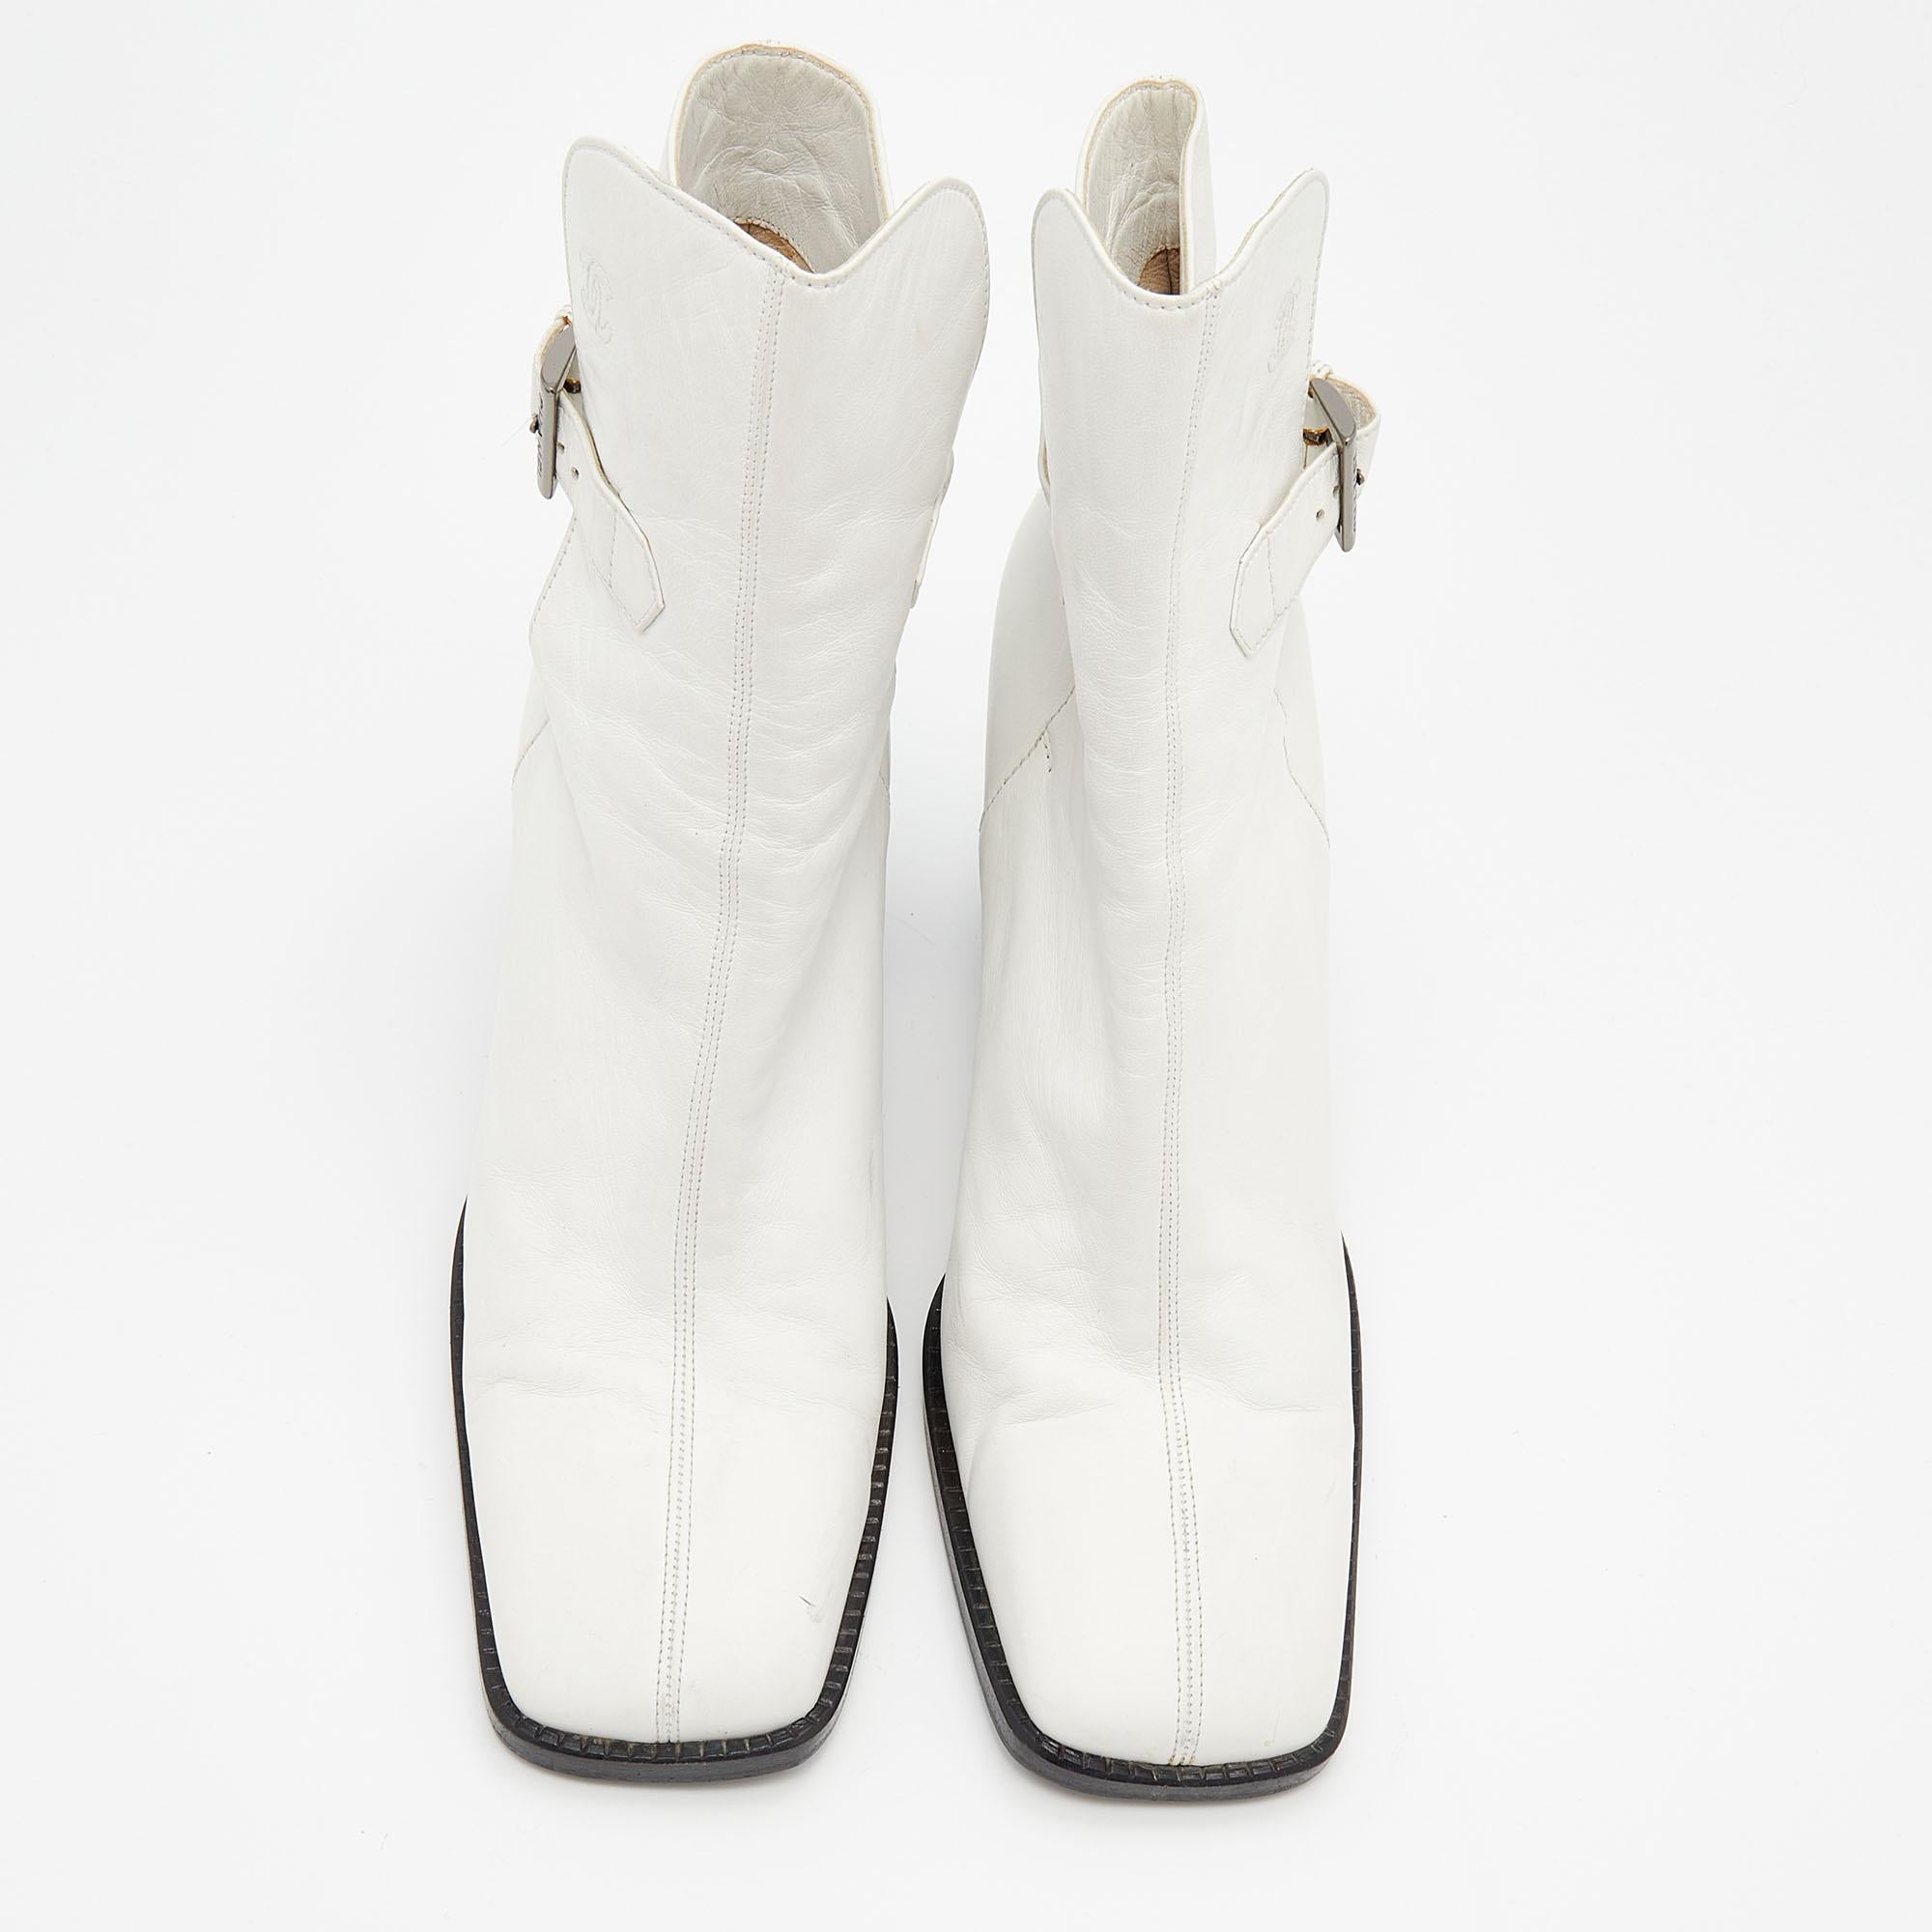 Get set to impress wherever you go with these vintage ankle boots from Chanel. The lovely white beauties are crafted from leather and feature square toes, buckled straps, and 10 cm block heels. The uber-chic boots are complete with leather soles.

